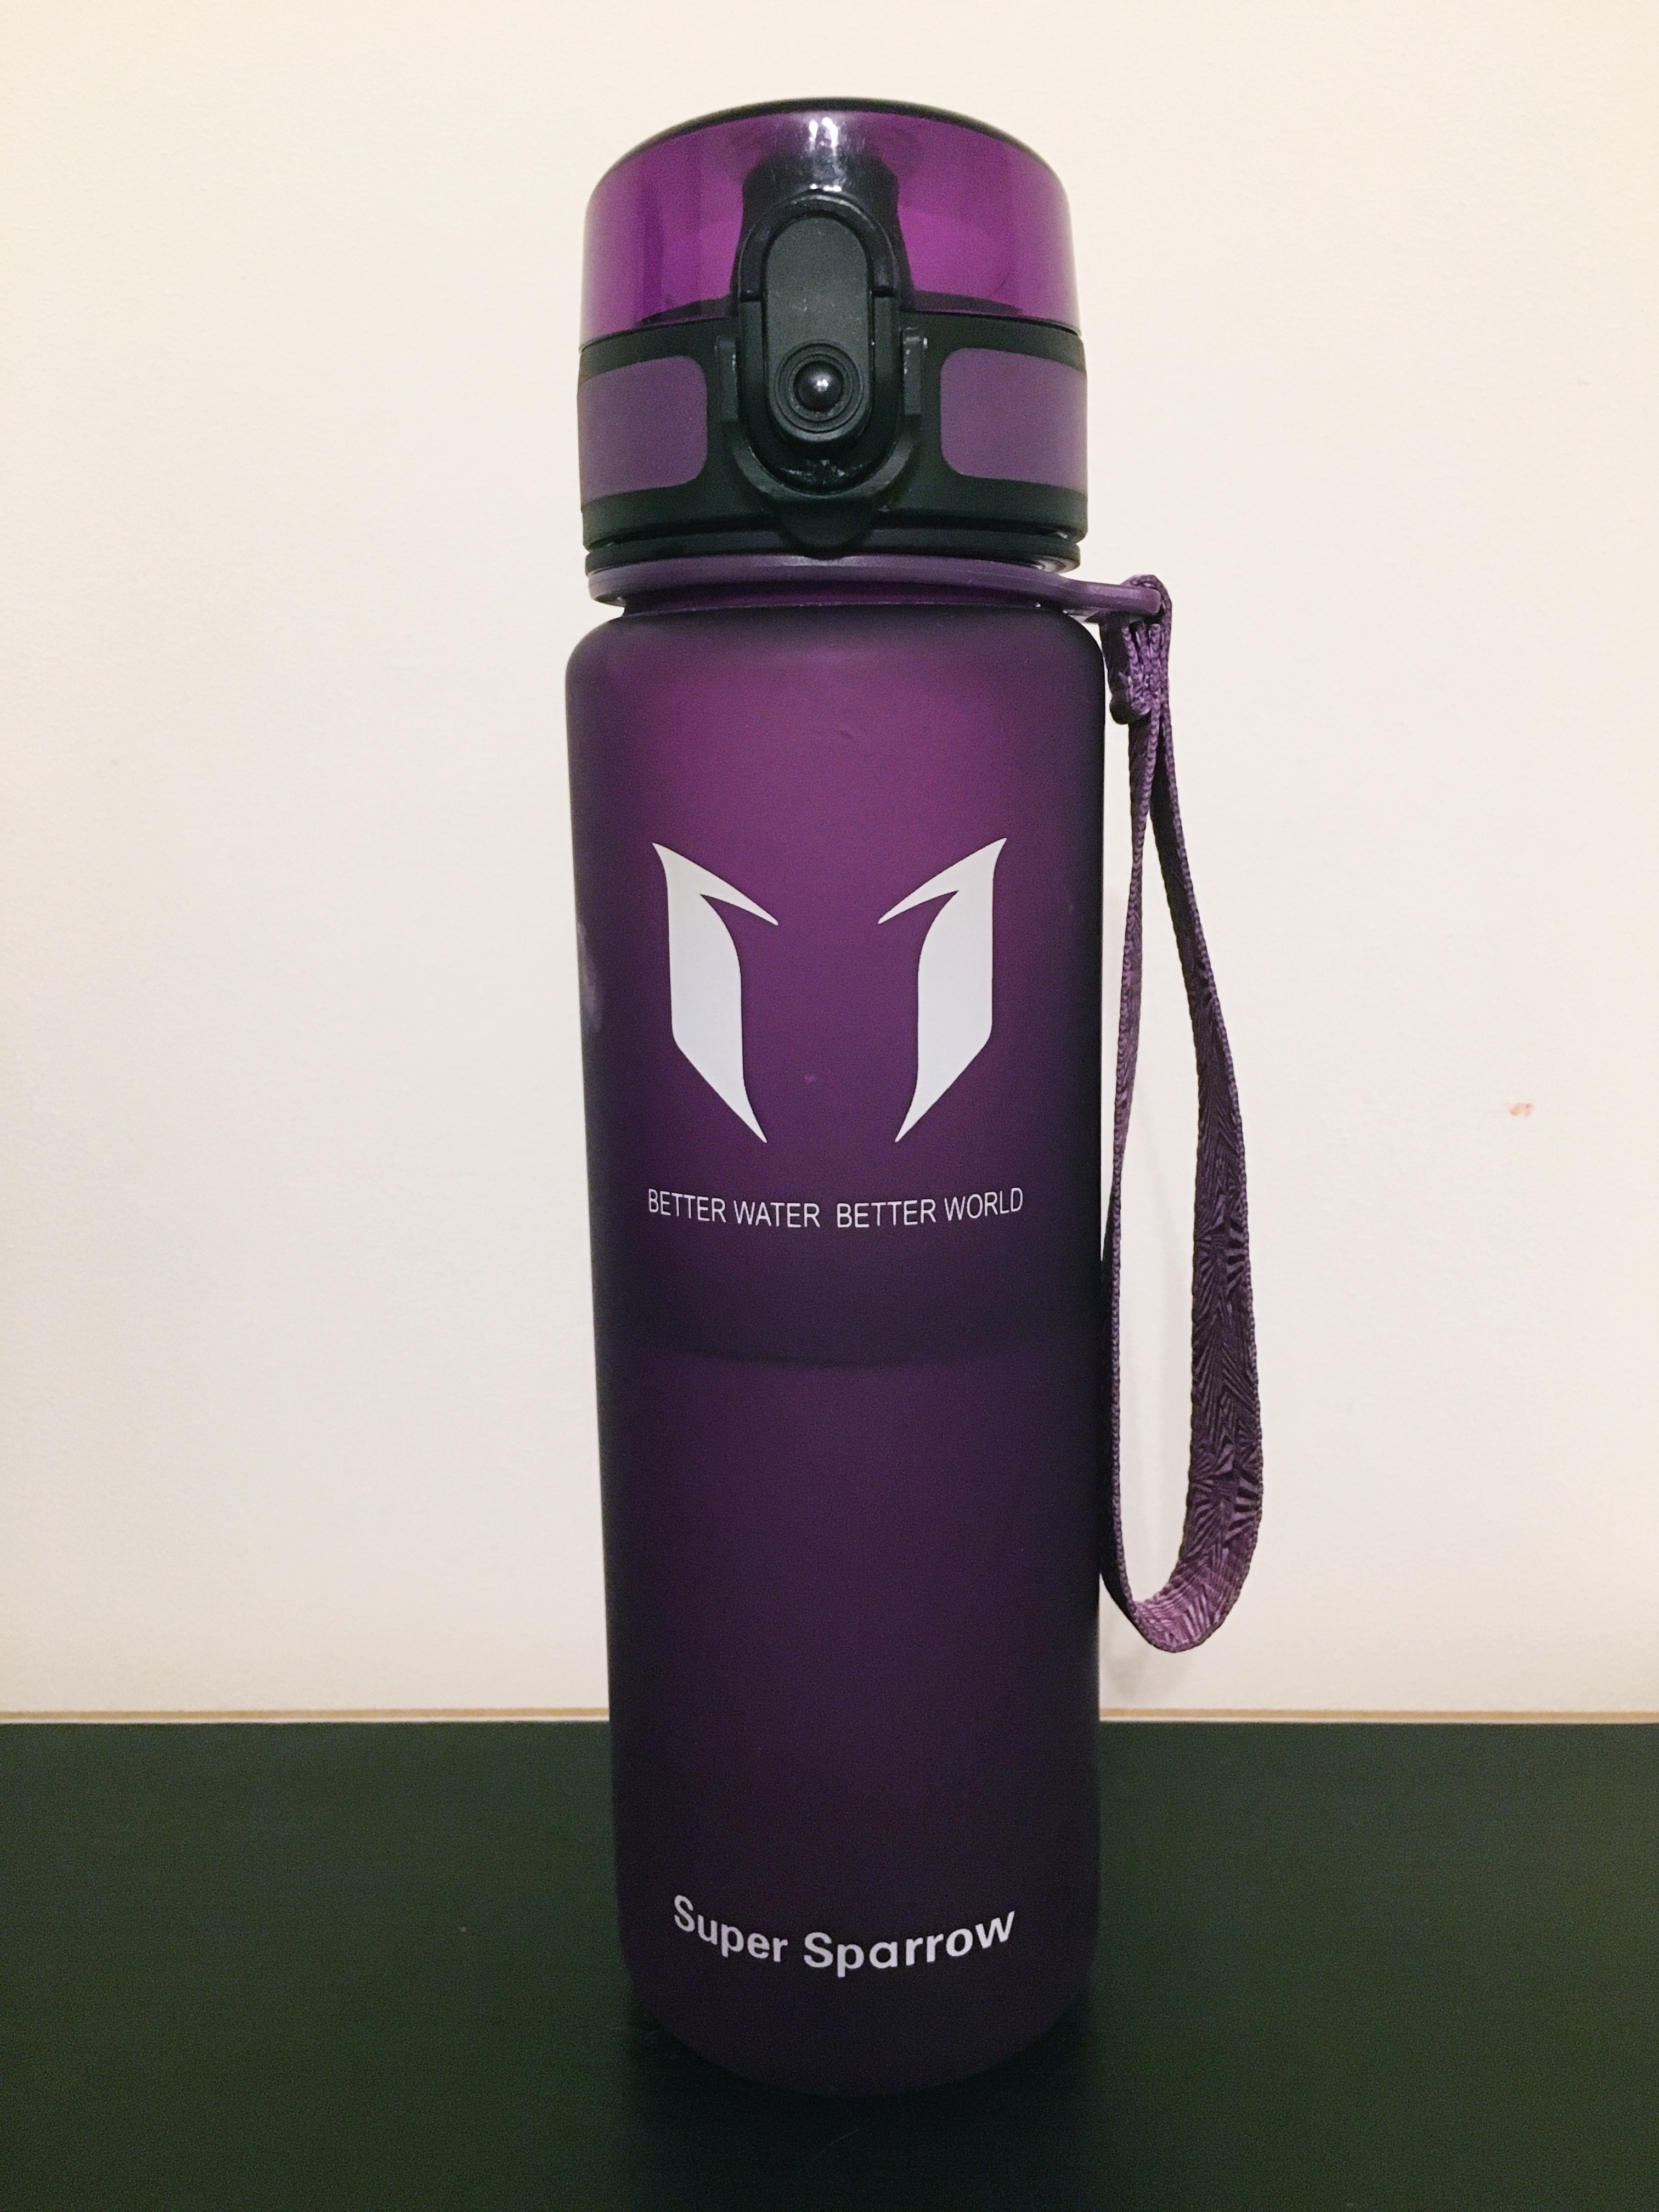 A photo of my purple SuperSparrow water bottle.